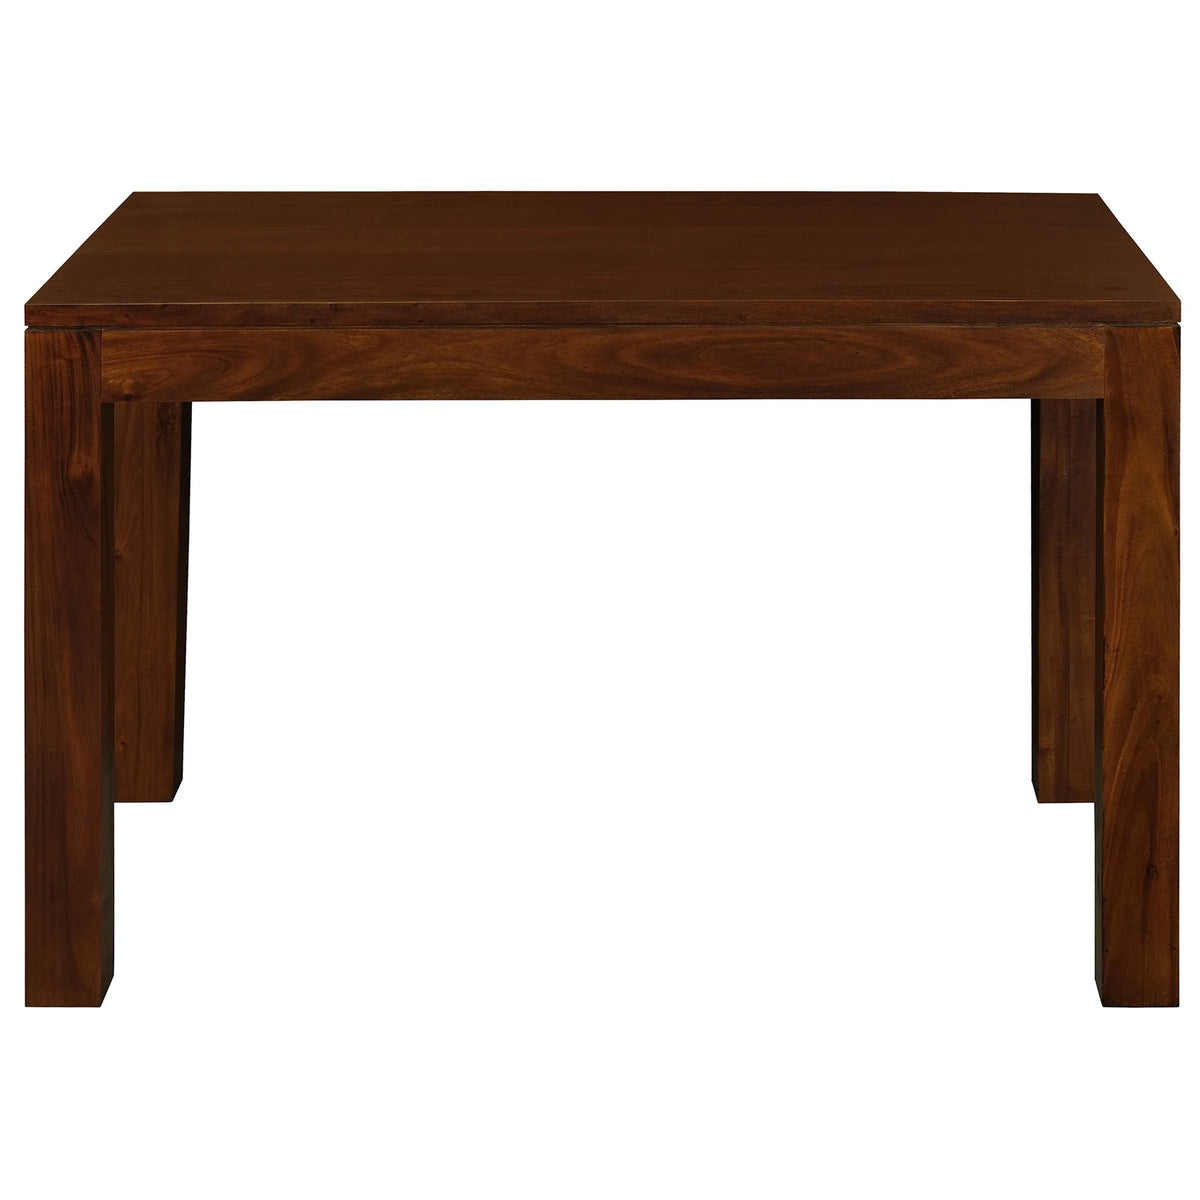 Amsterdam Timber Dining Table in Mahogany - 120cm - Notbrand